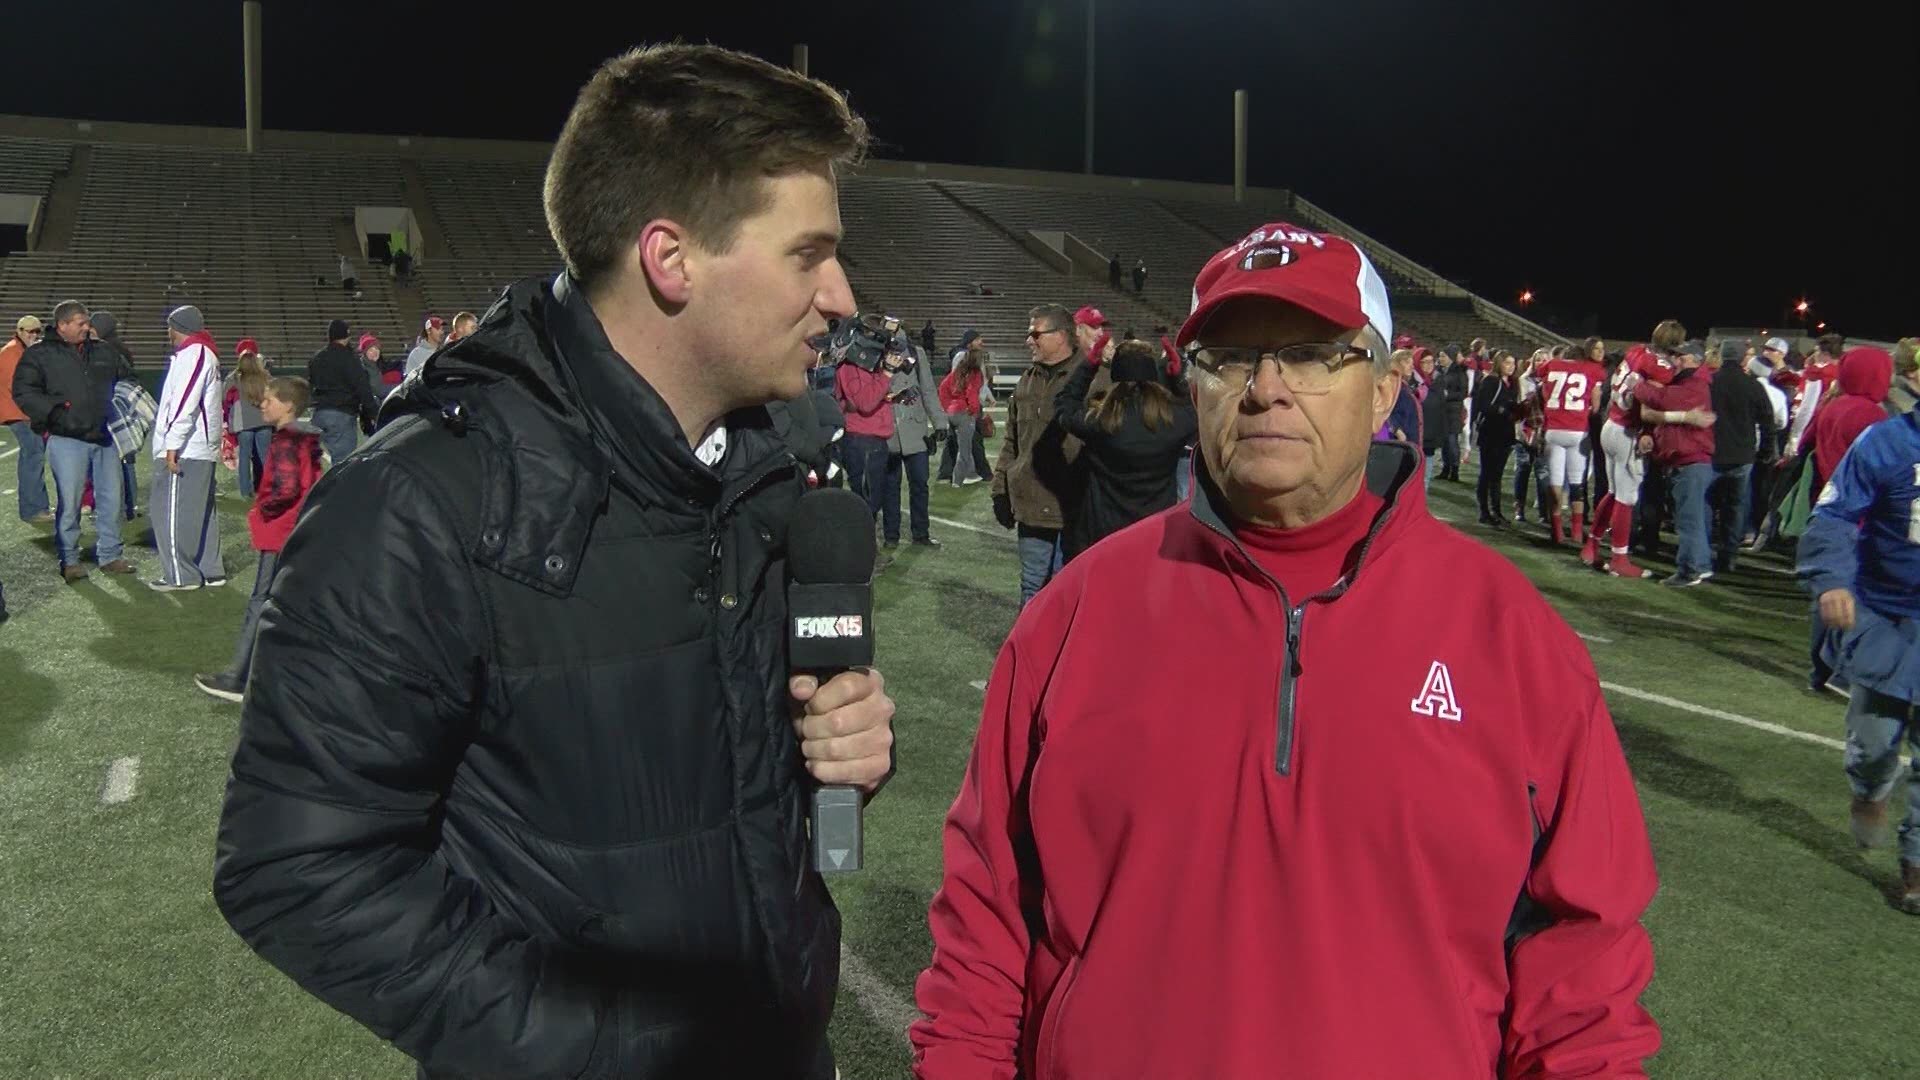 Albany has shown incredible fight all year long, and it was on display in the teams 41-28 victory over Hamlin in the Regional Finals. Coach Faith is now at 299 career wins.